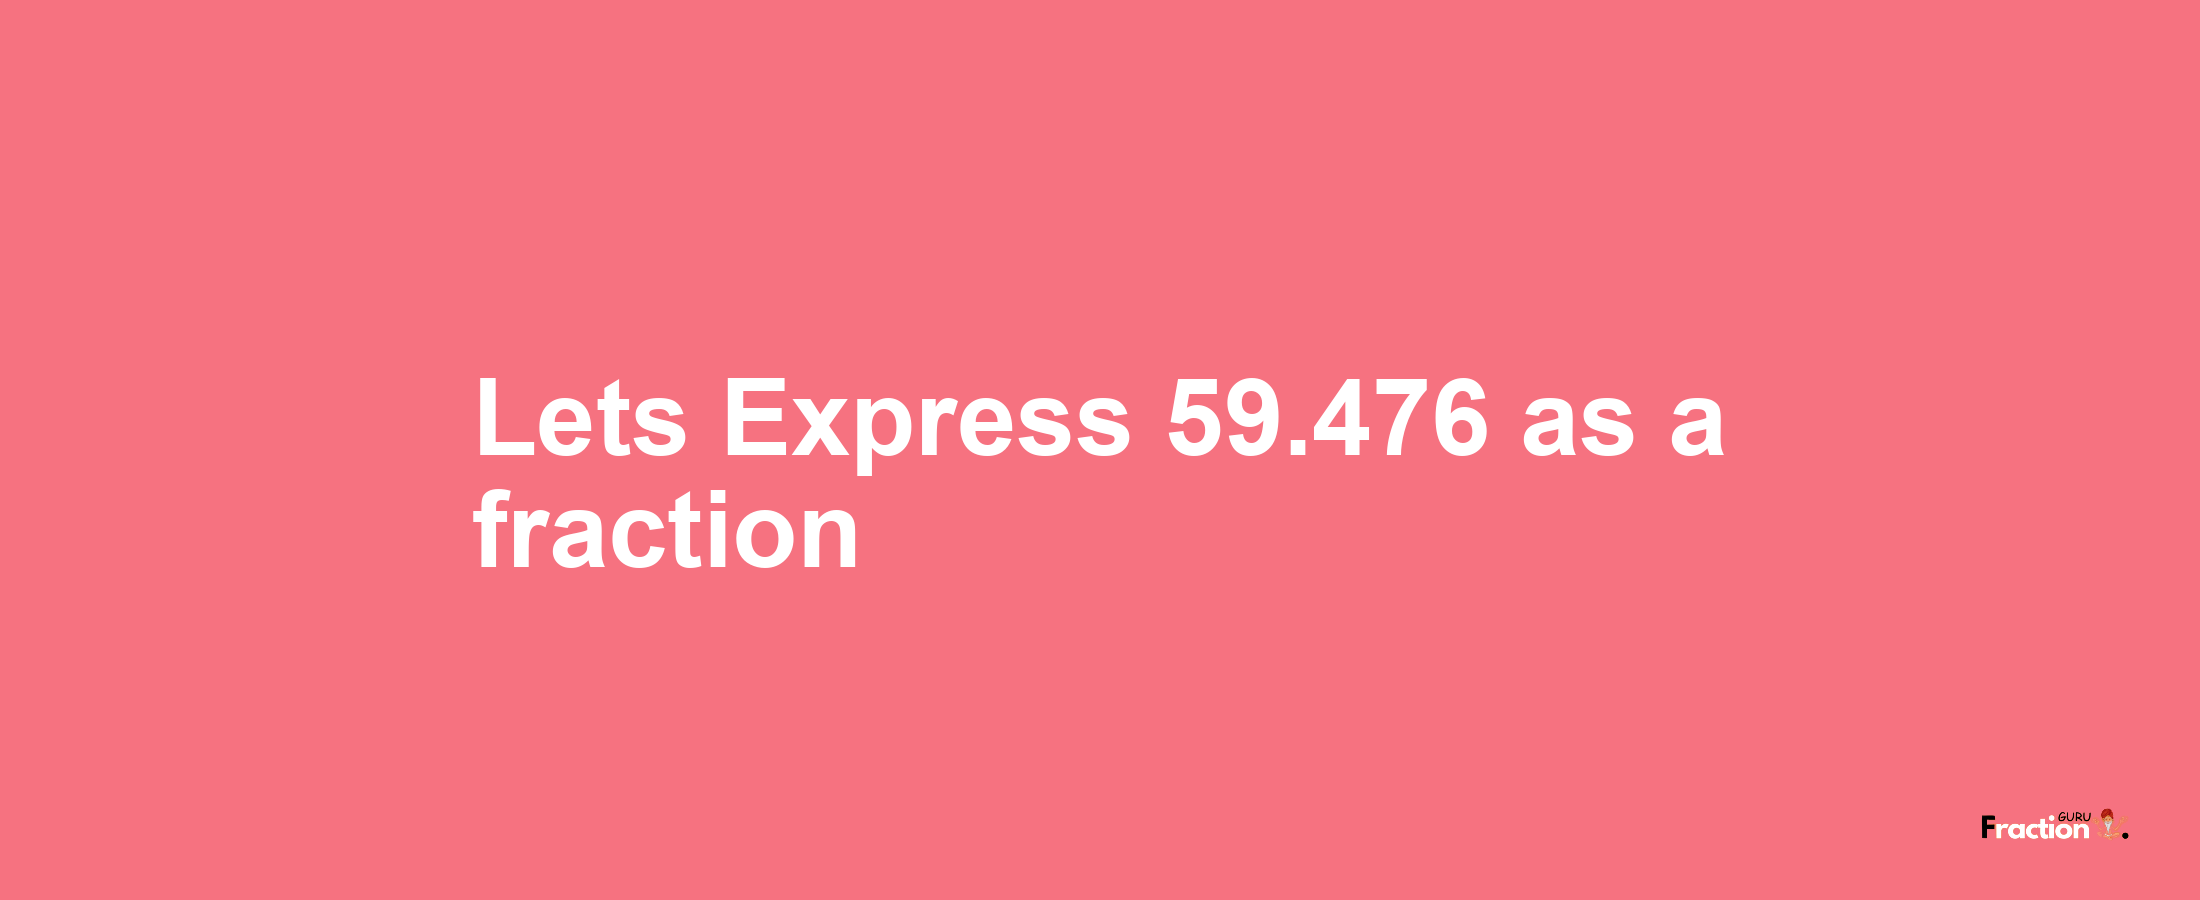 Lets Express 59.476 as afraction